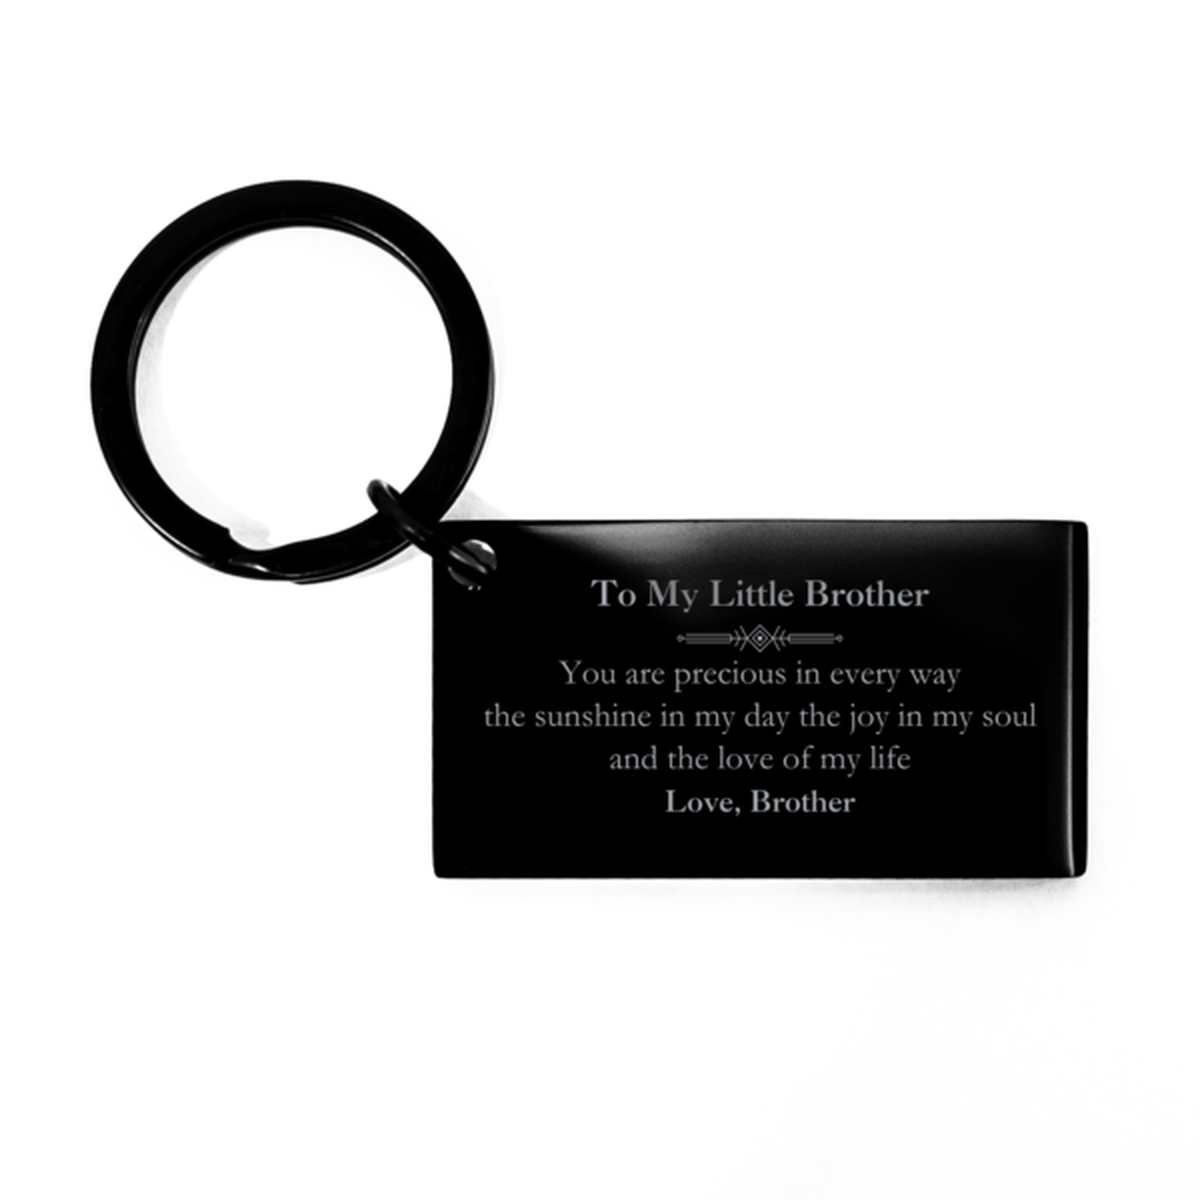 Graduation Gifts for Little Brother Keychain Present from Brother, Christmas Little Brother Birthday Gifts Little Brother You are precious in every way the sunshine in my day. Love, Brother